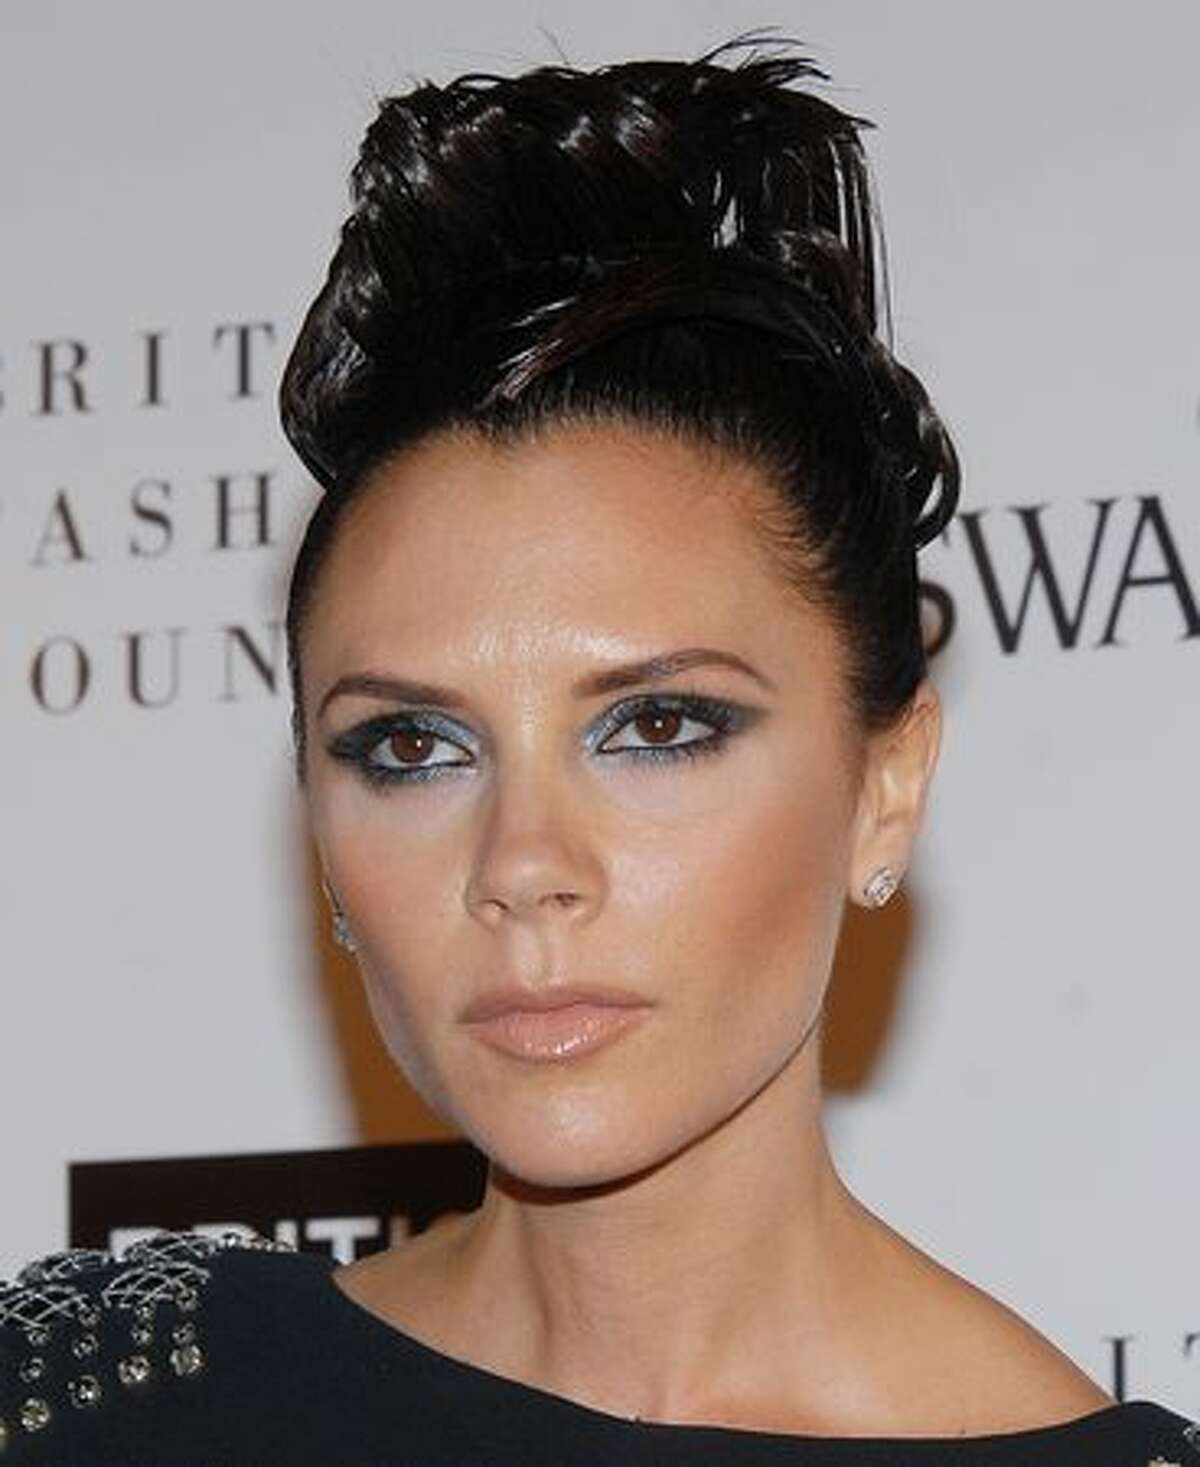 Victoria Beckham attends the British Fashion Awards at Royal Courts of Justice, Strand in London, England.